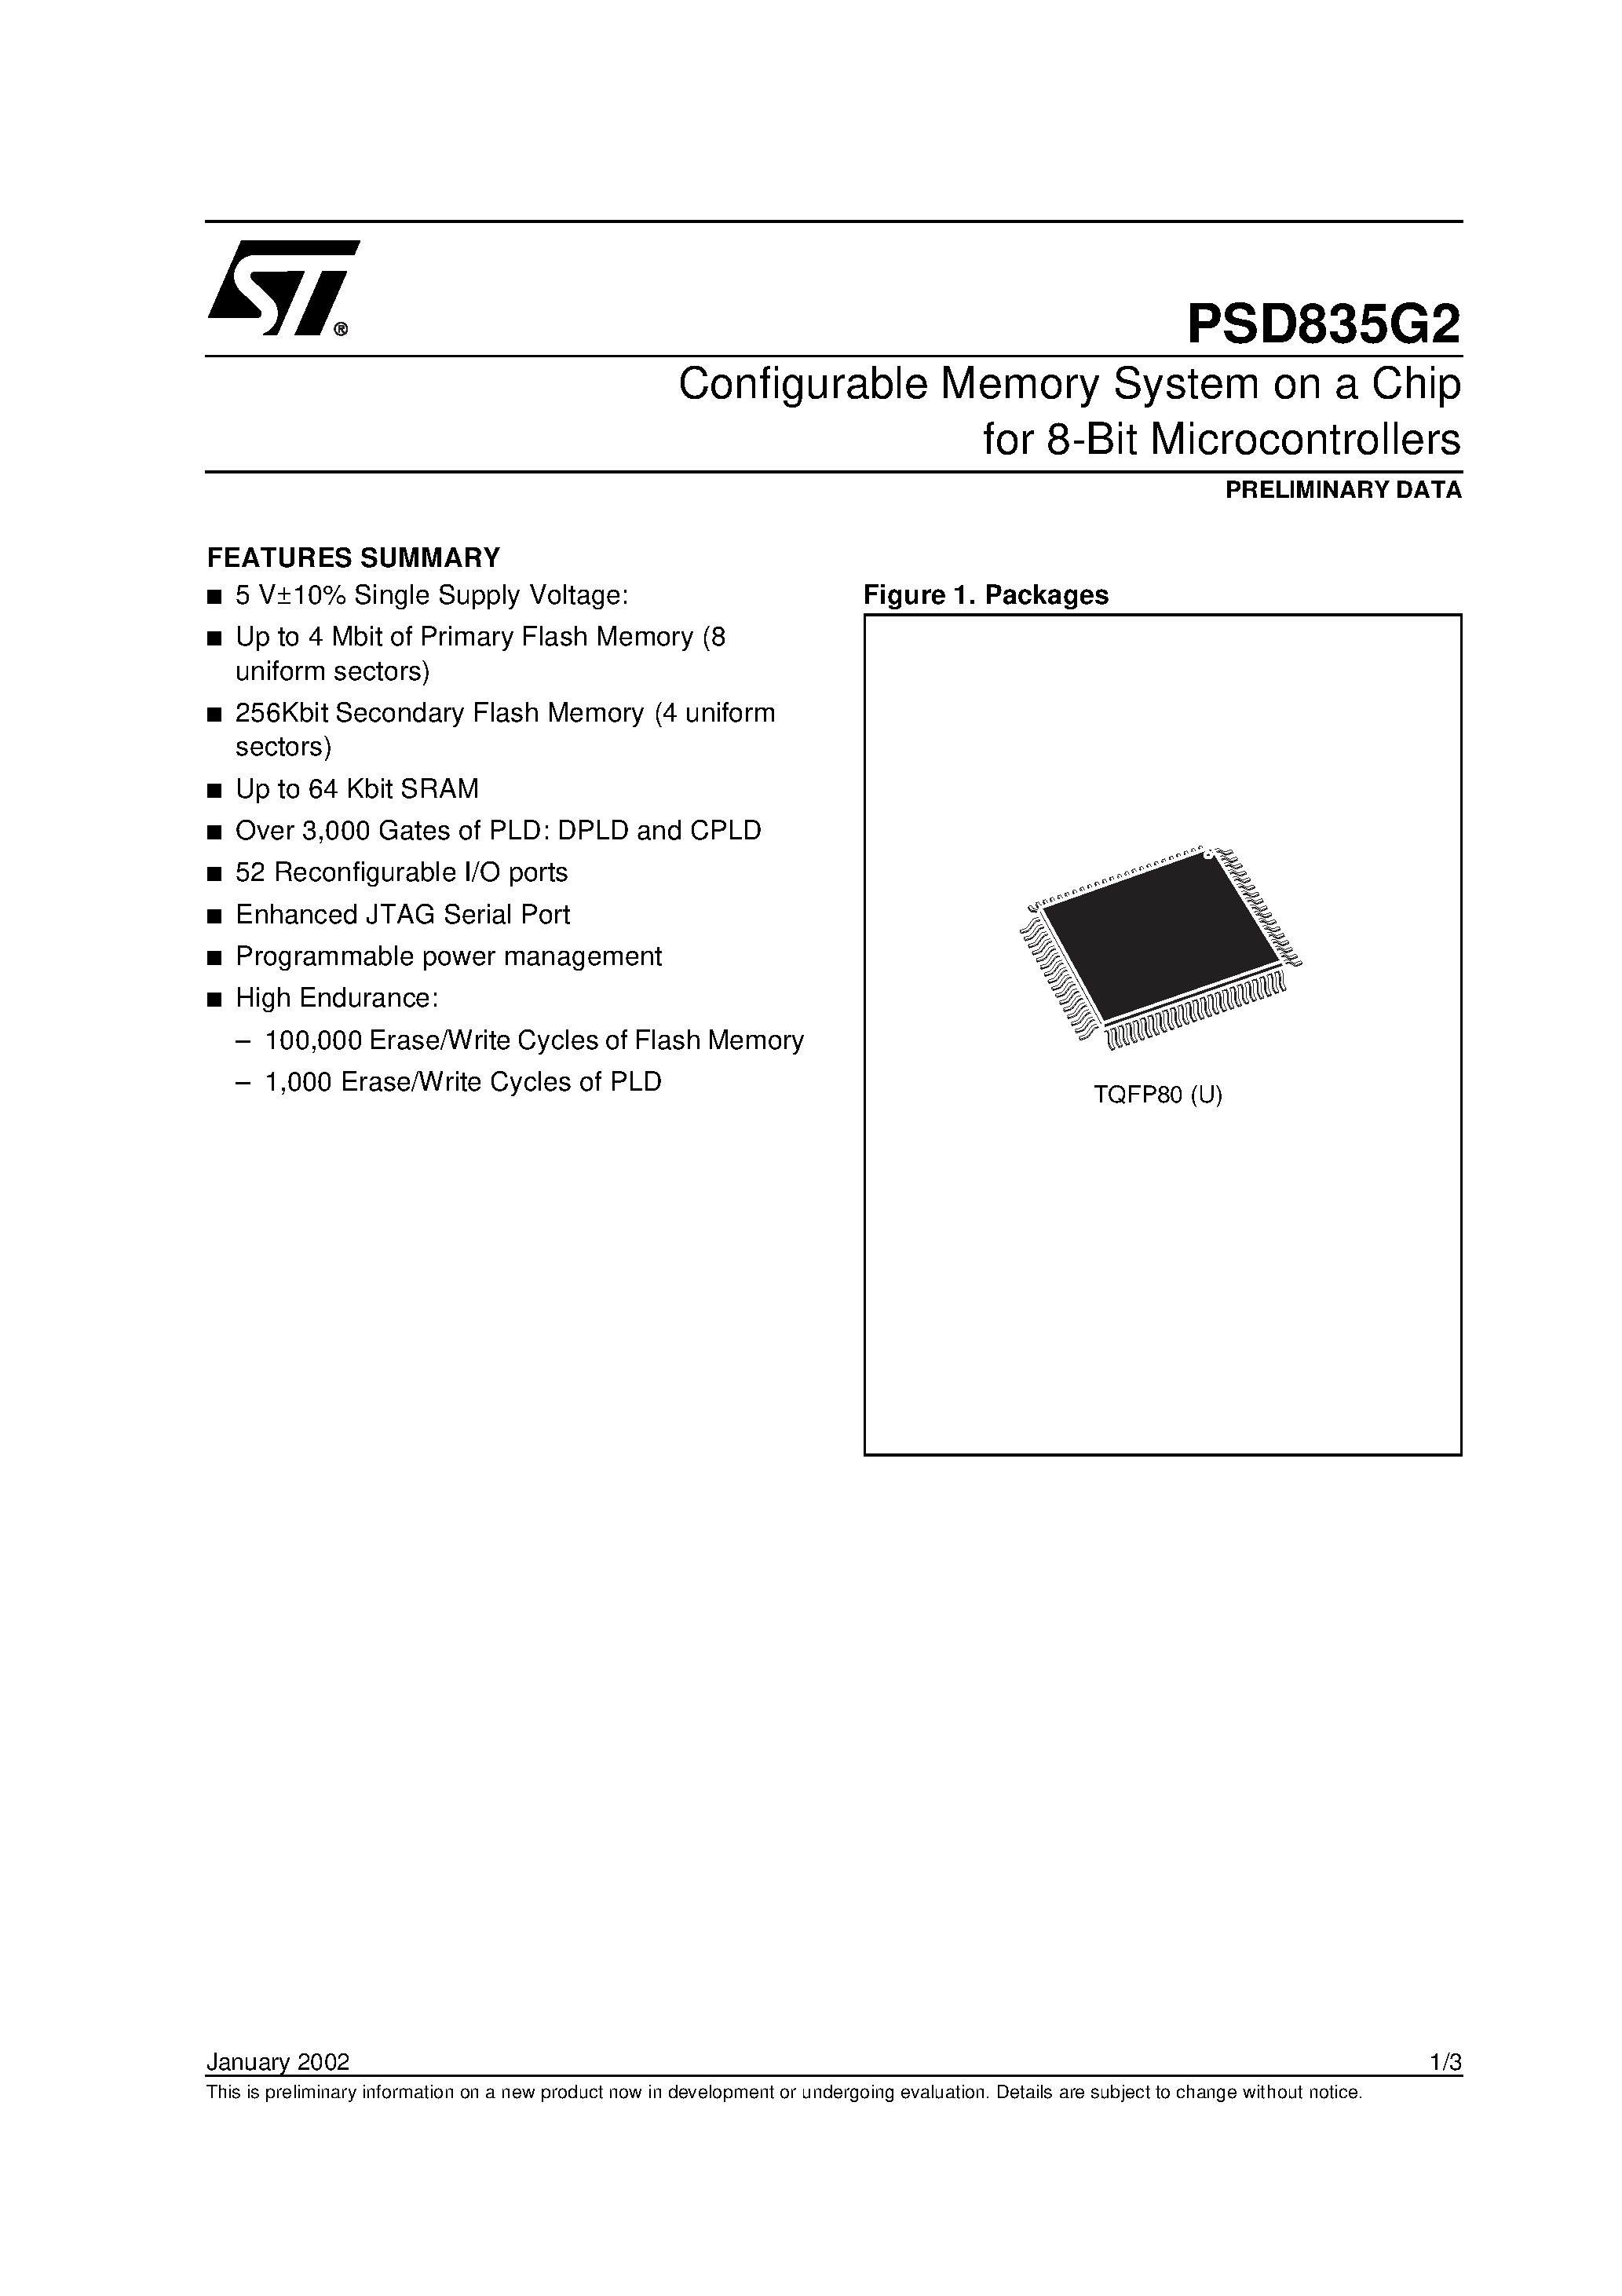 Datasheet PSD835F2V-A-90UI - Configurable Memory System on a Chip for 8-Bit Microcontrollers page 1